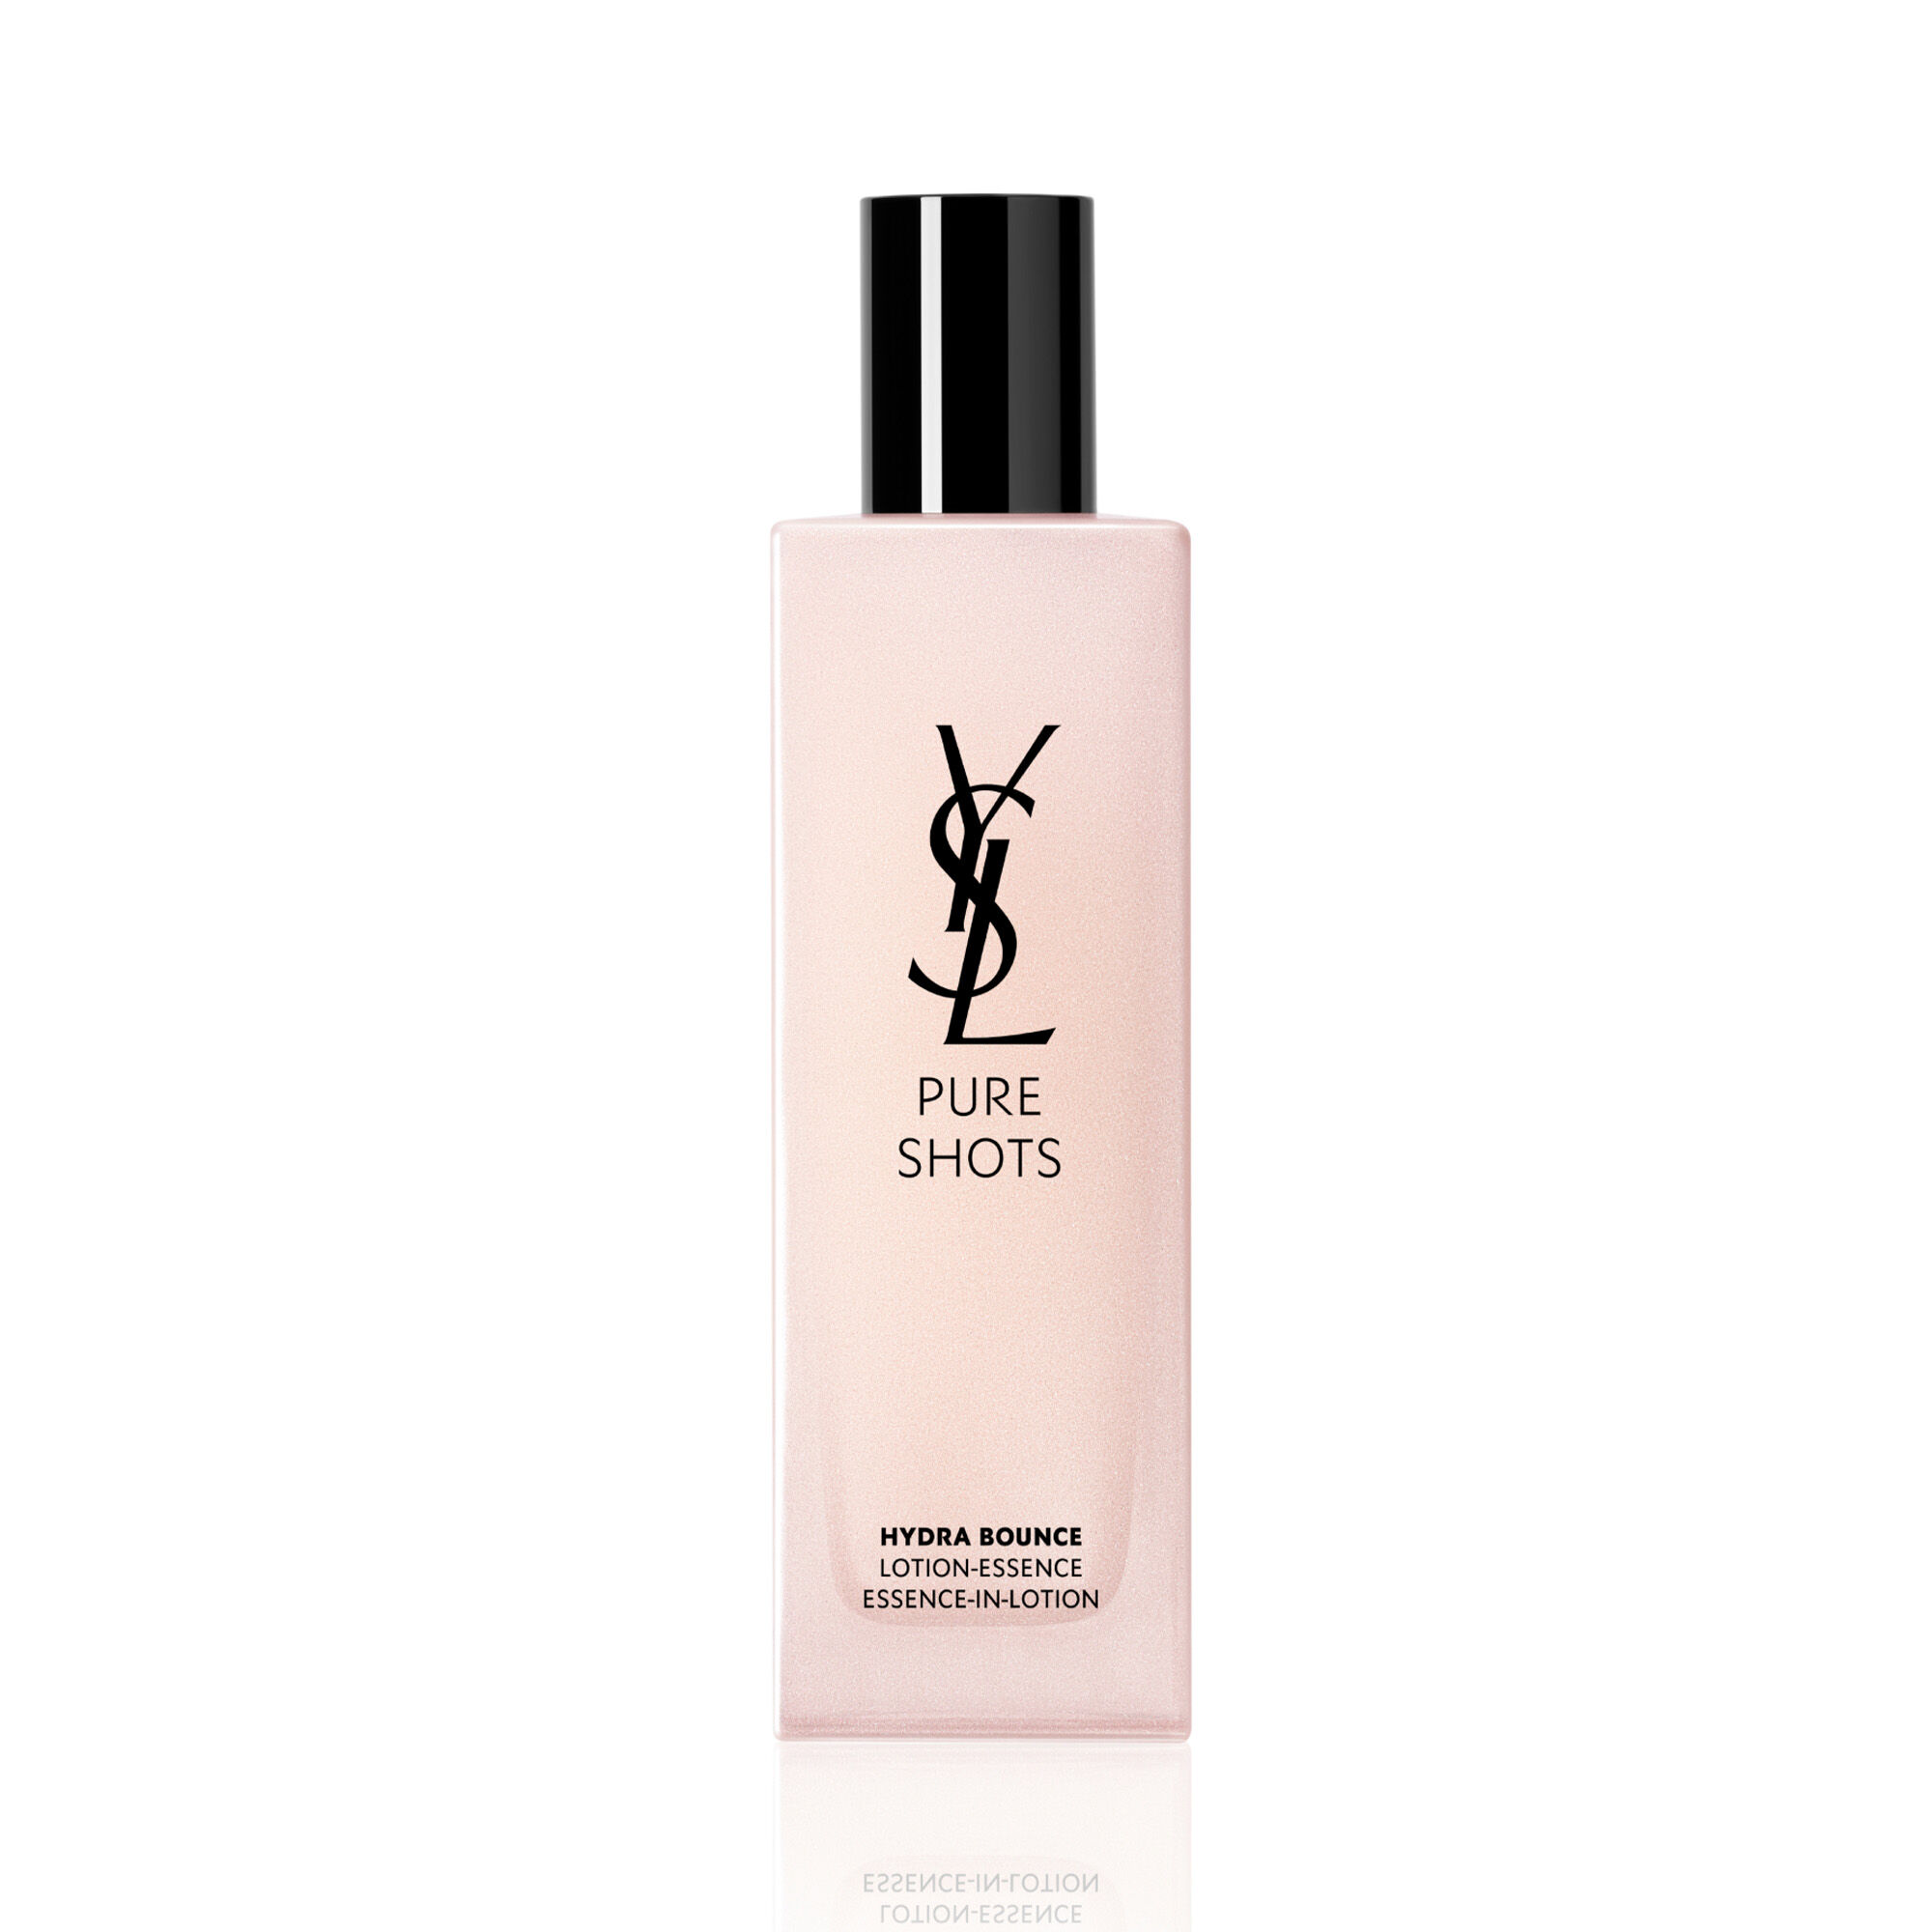 YSL Beauty's Hydra Bounce Essence in Lotion - skincare.